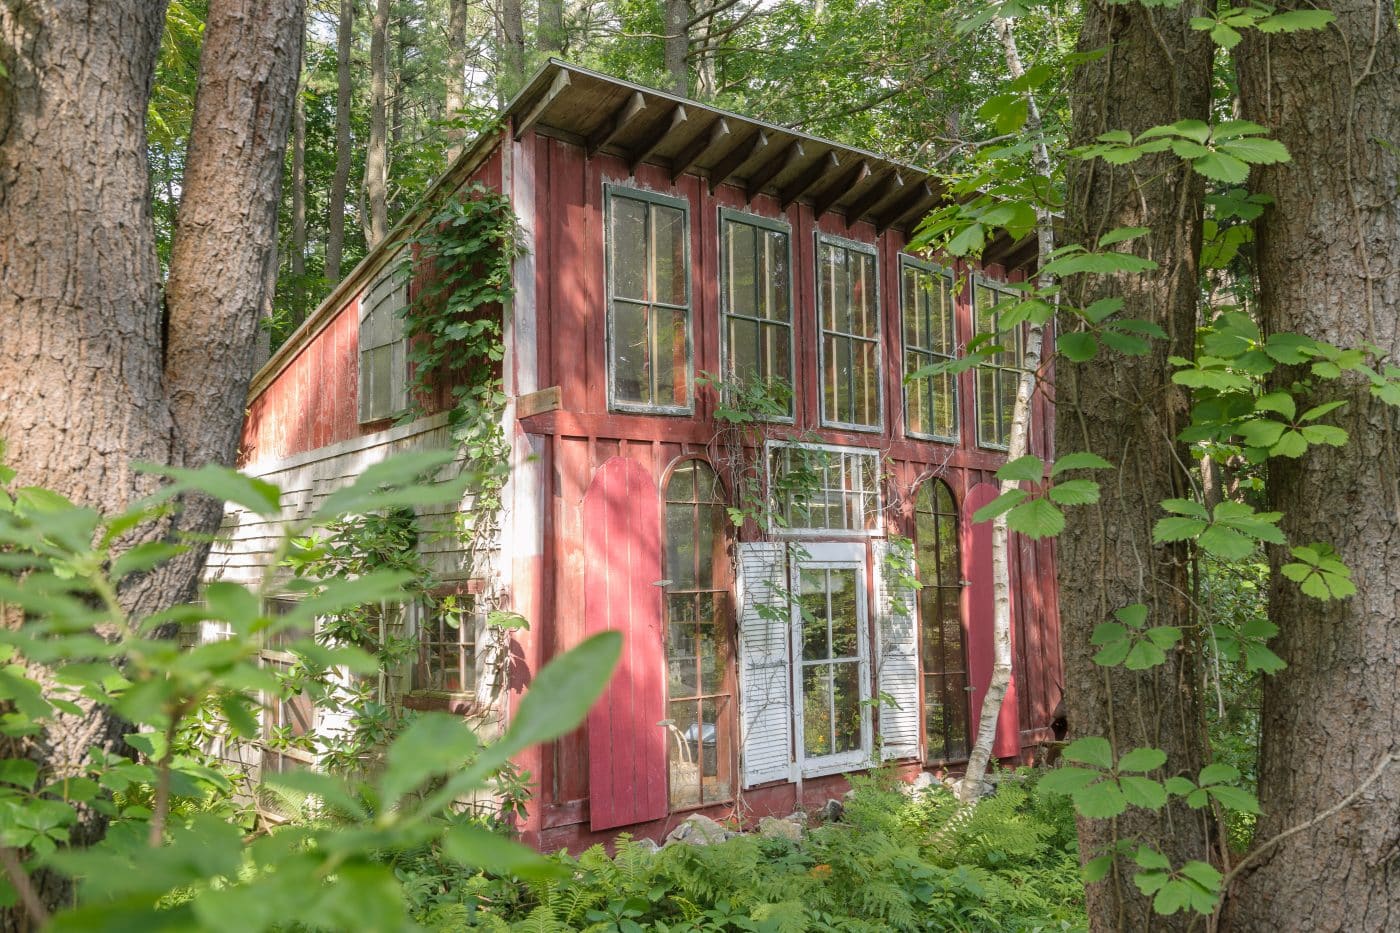 David Driskell's Falmouth bungalow and studio in the woods